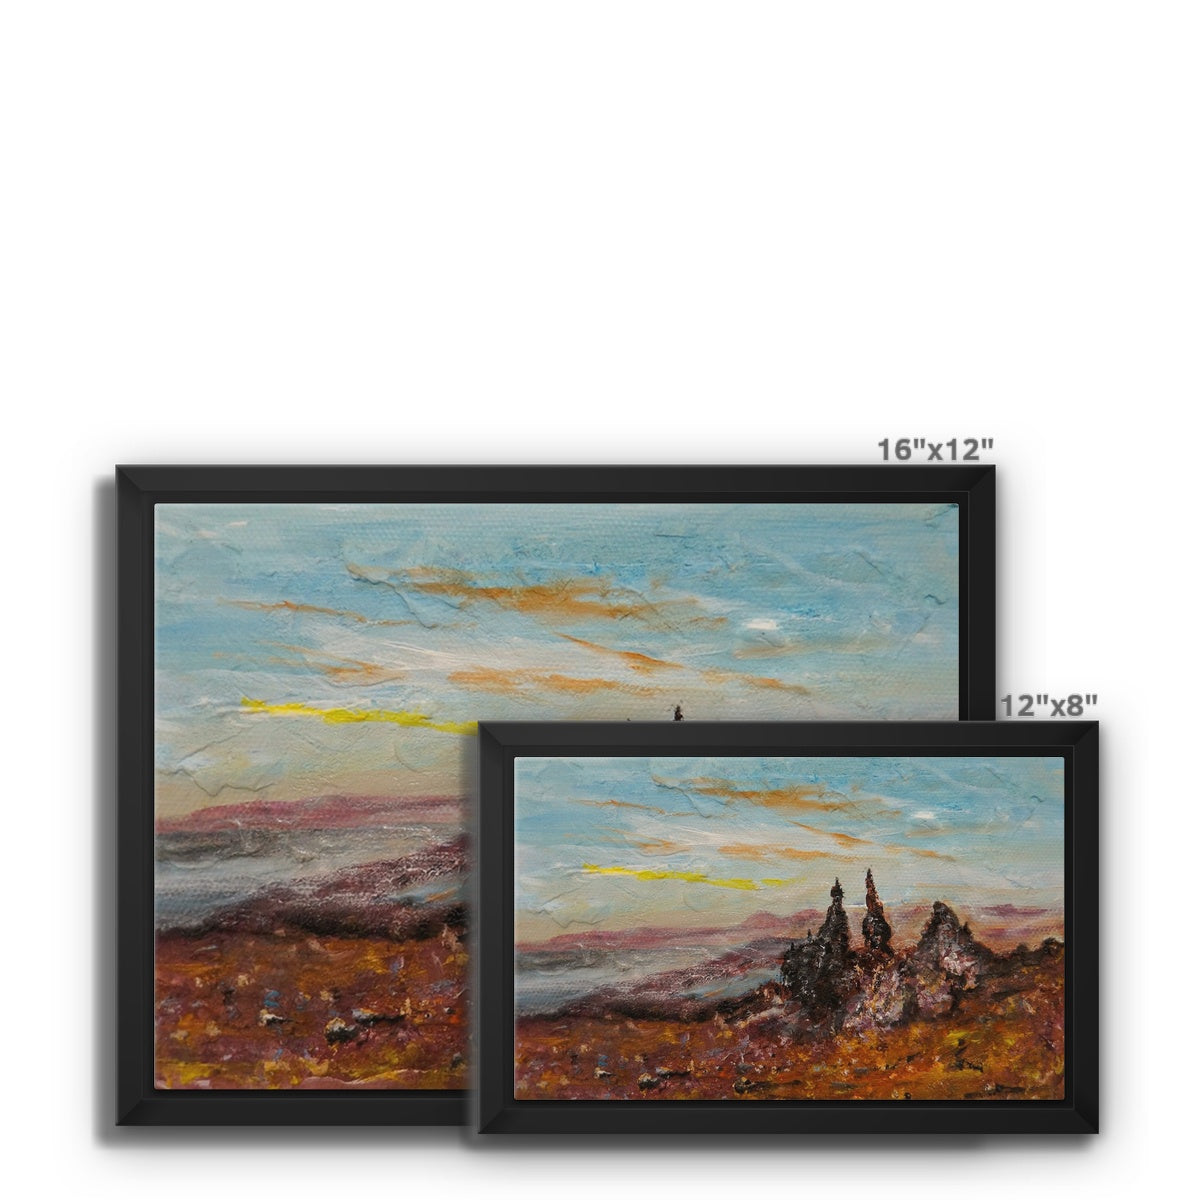 The Storr Skye Painting | Framed Canvas From Scotland-Floating Framed Canvas Prints-Skye Art Gallery-Paintings, Prints, Homeware, Art Gifts From Scotland By Scottish Artist Kevin Hunter